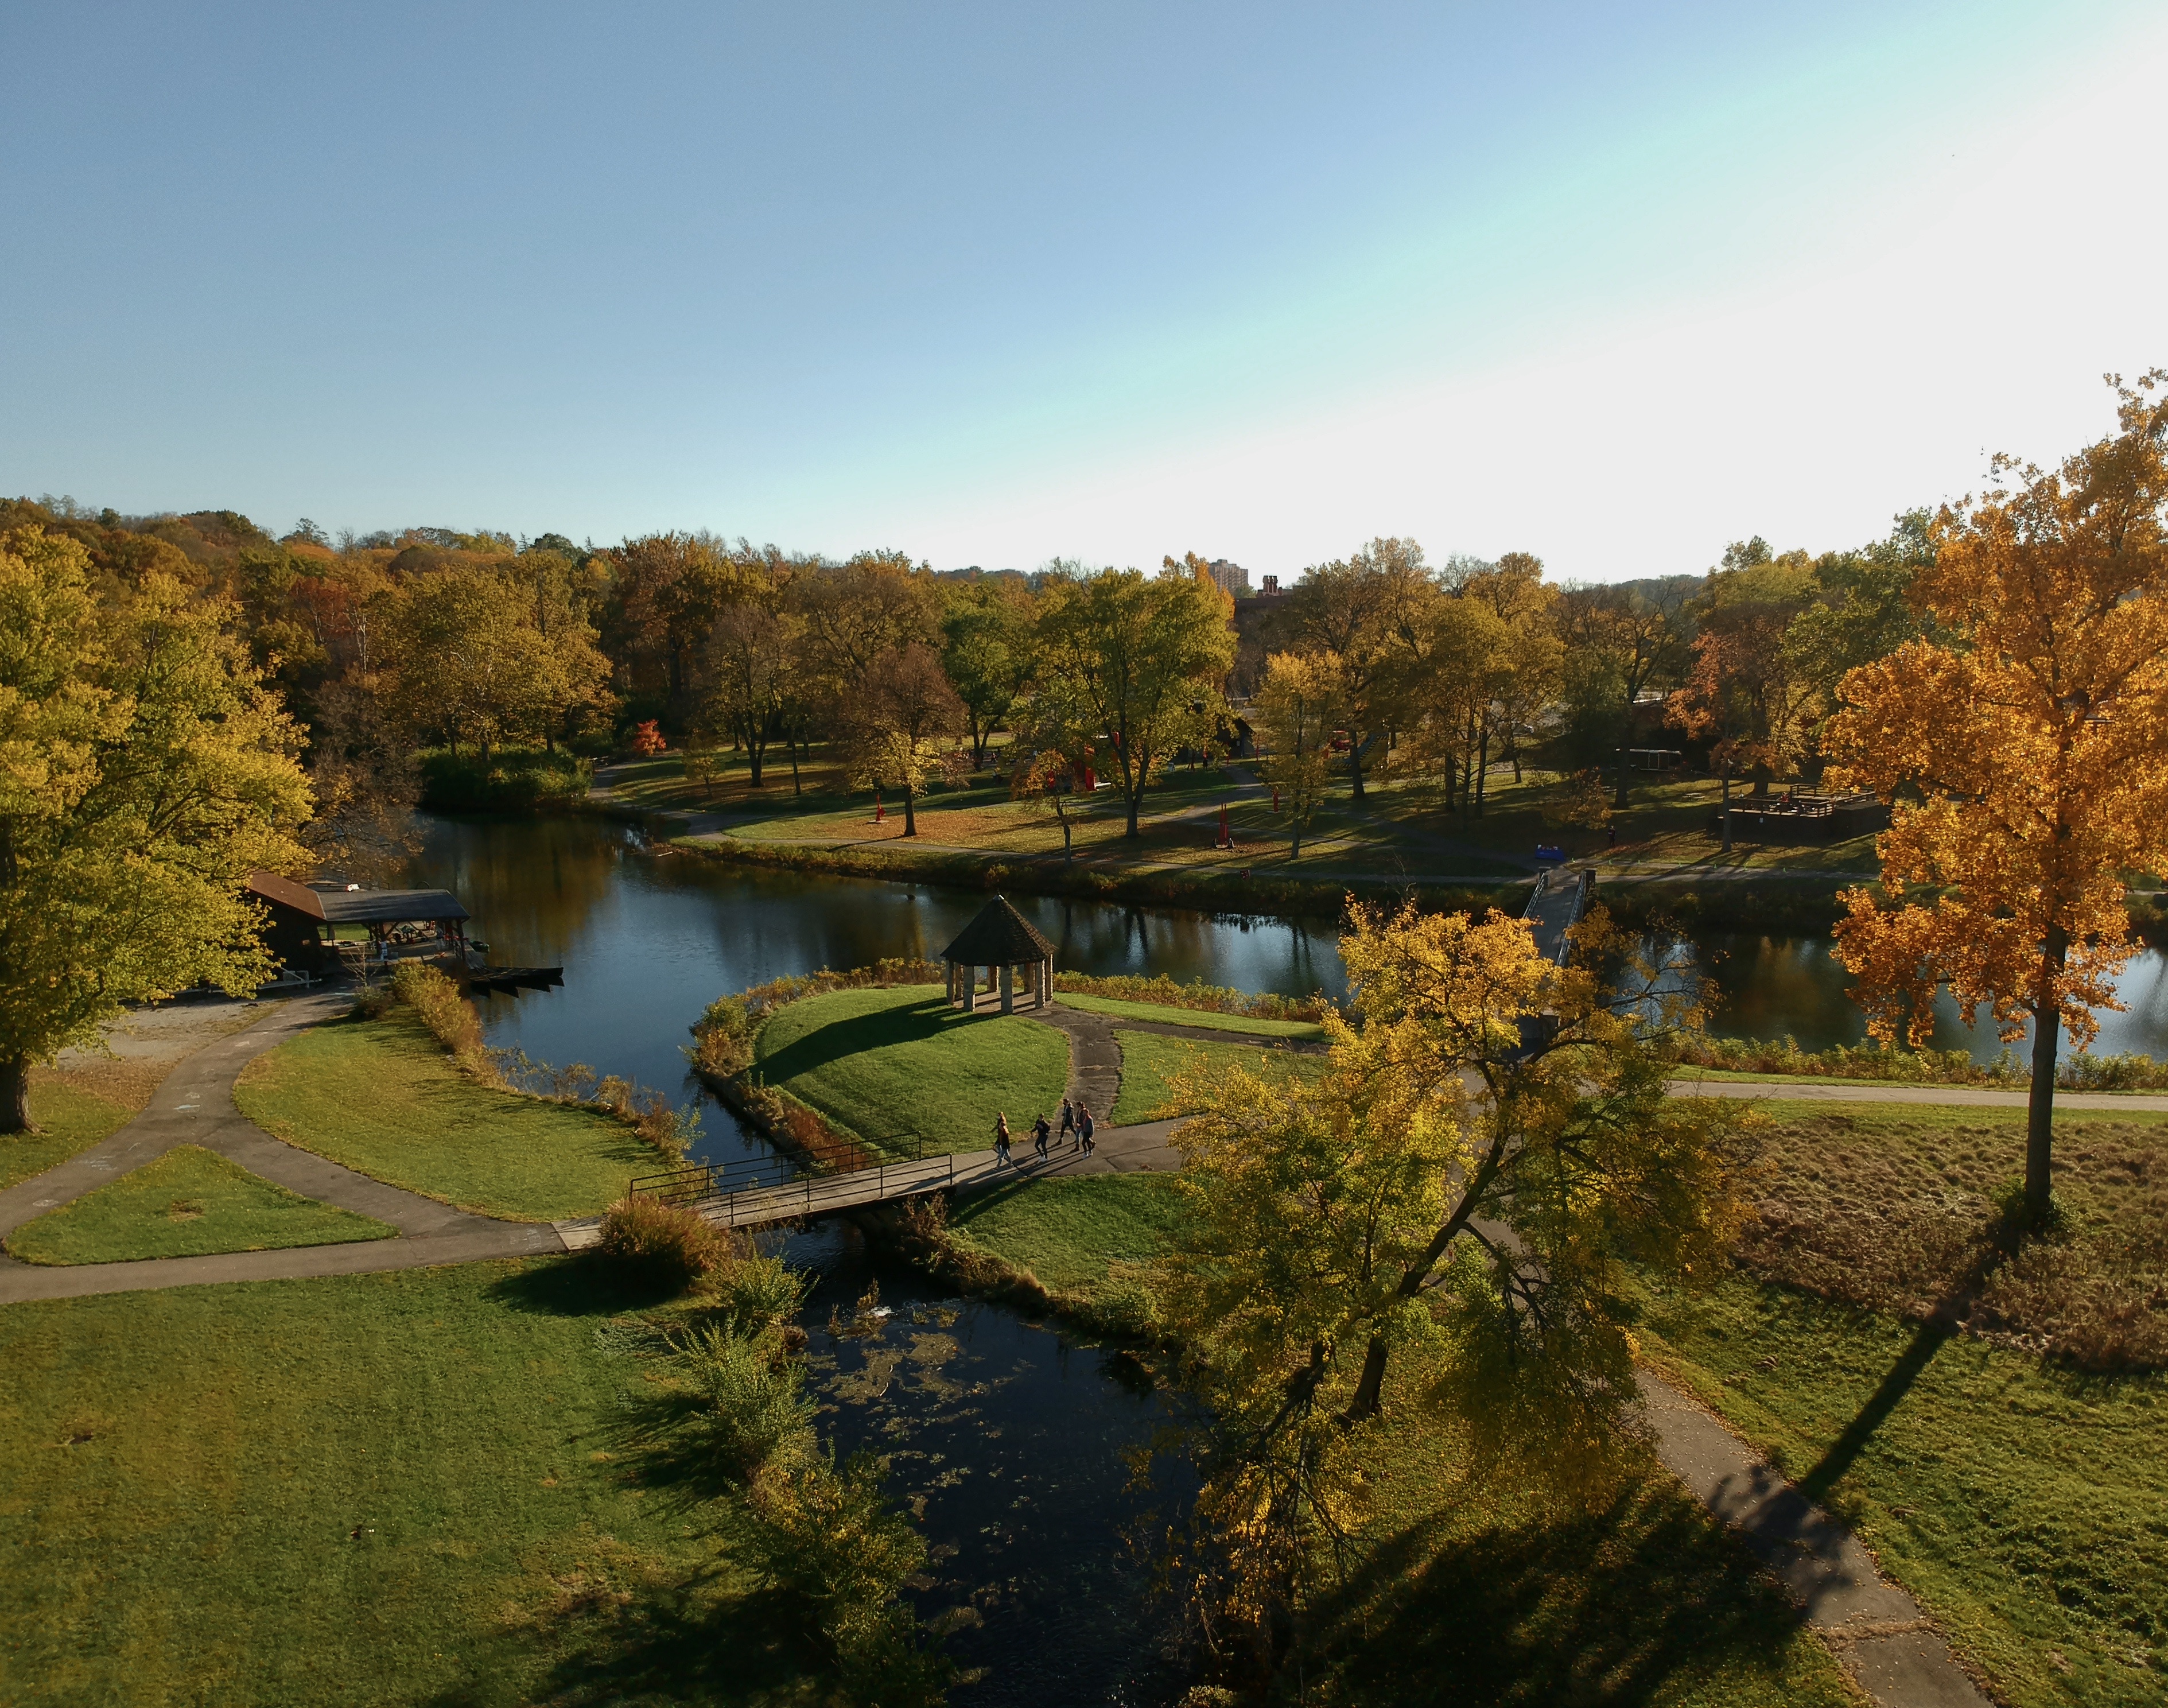 Overhead view of Old River Park in the fall